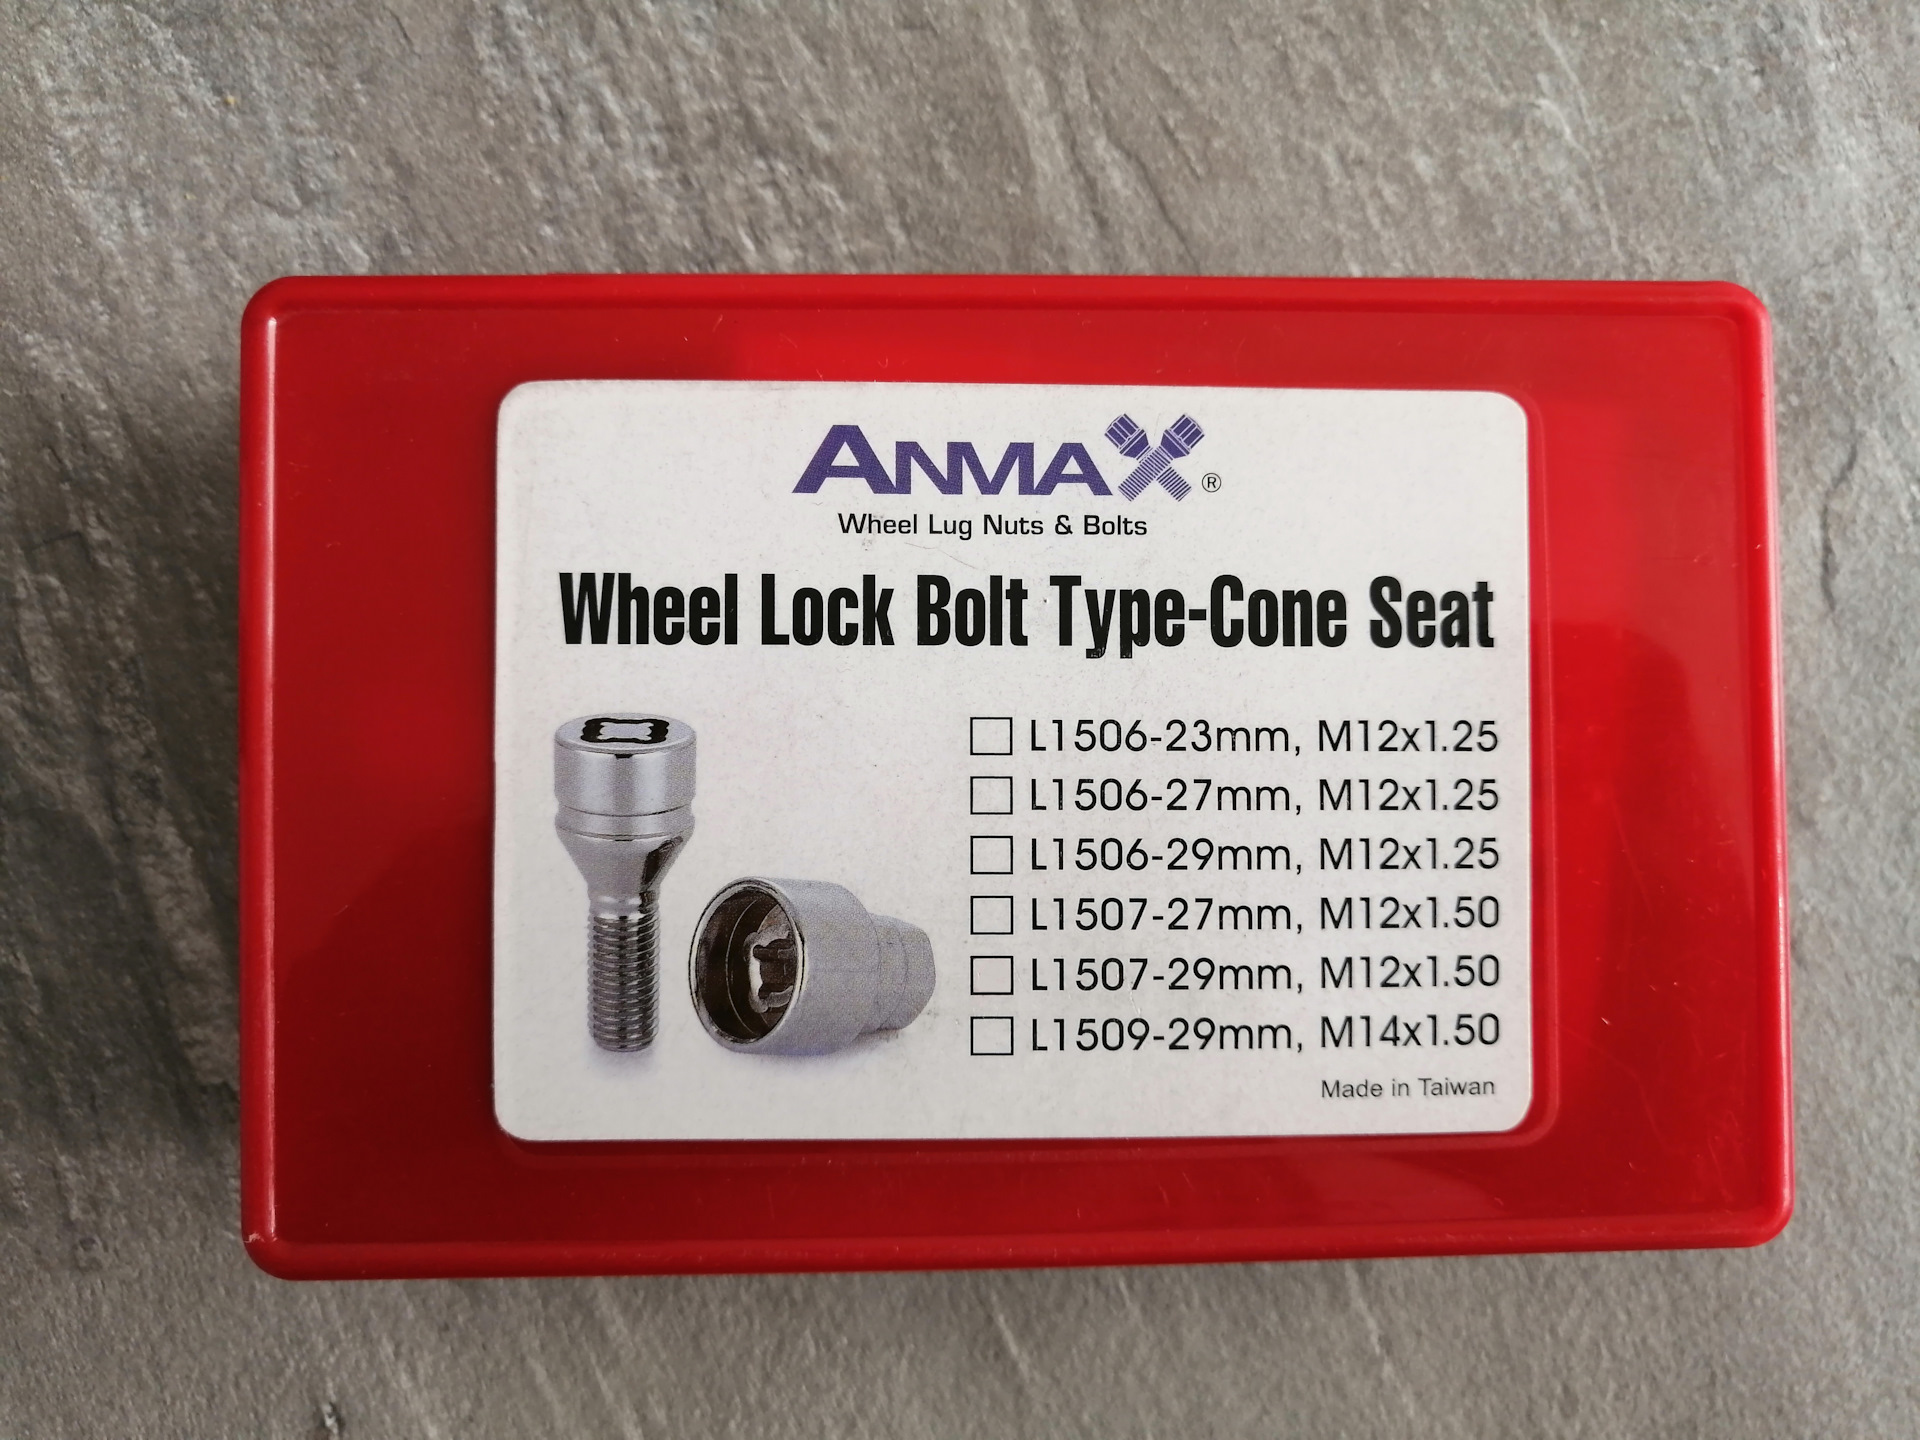 Anmax l1506-27mm. Anma Wheel Lock Bolt Type-Cone Seat.